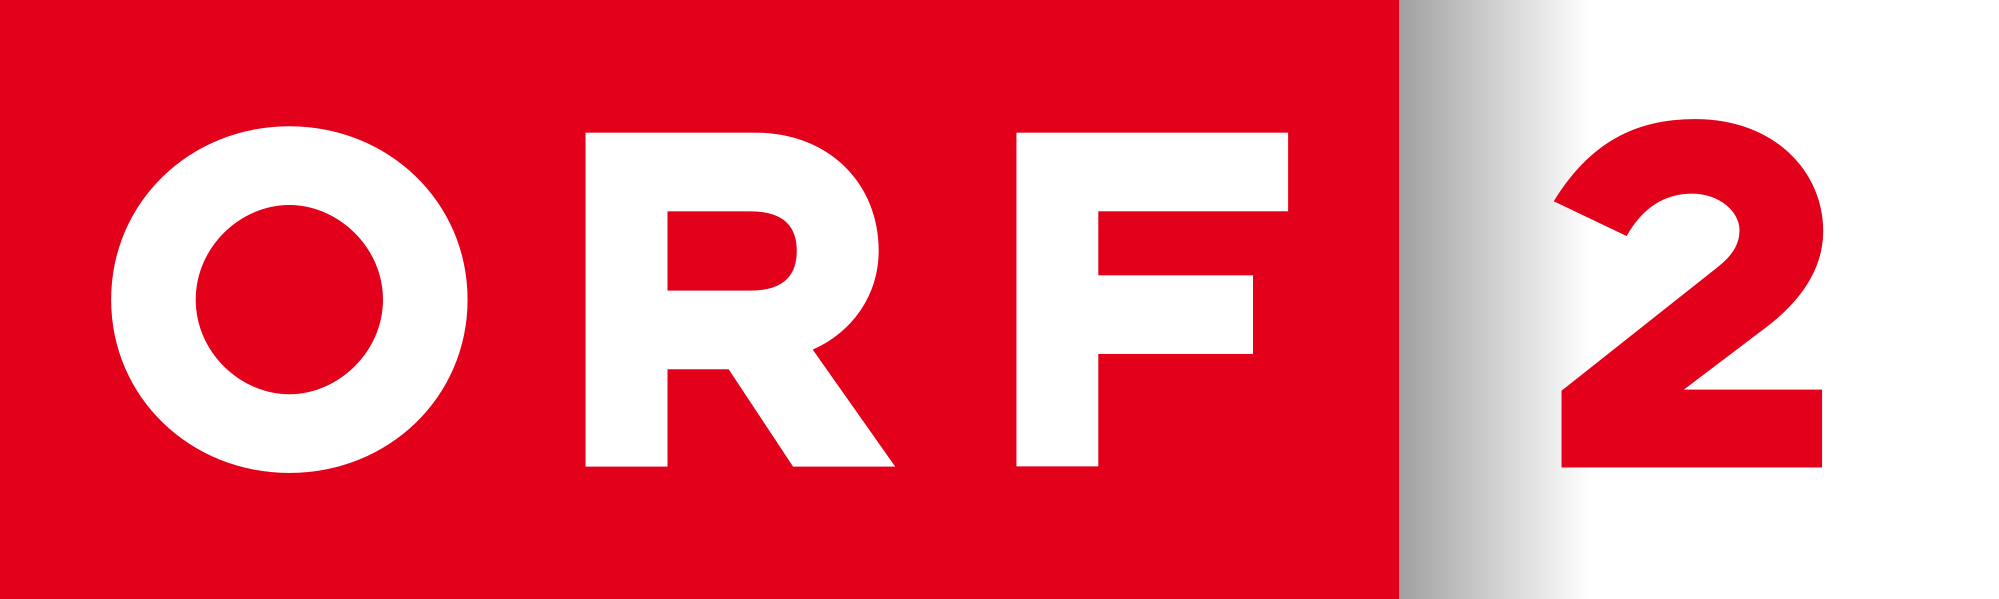 ORF 2 - network